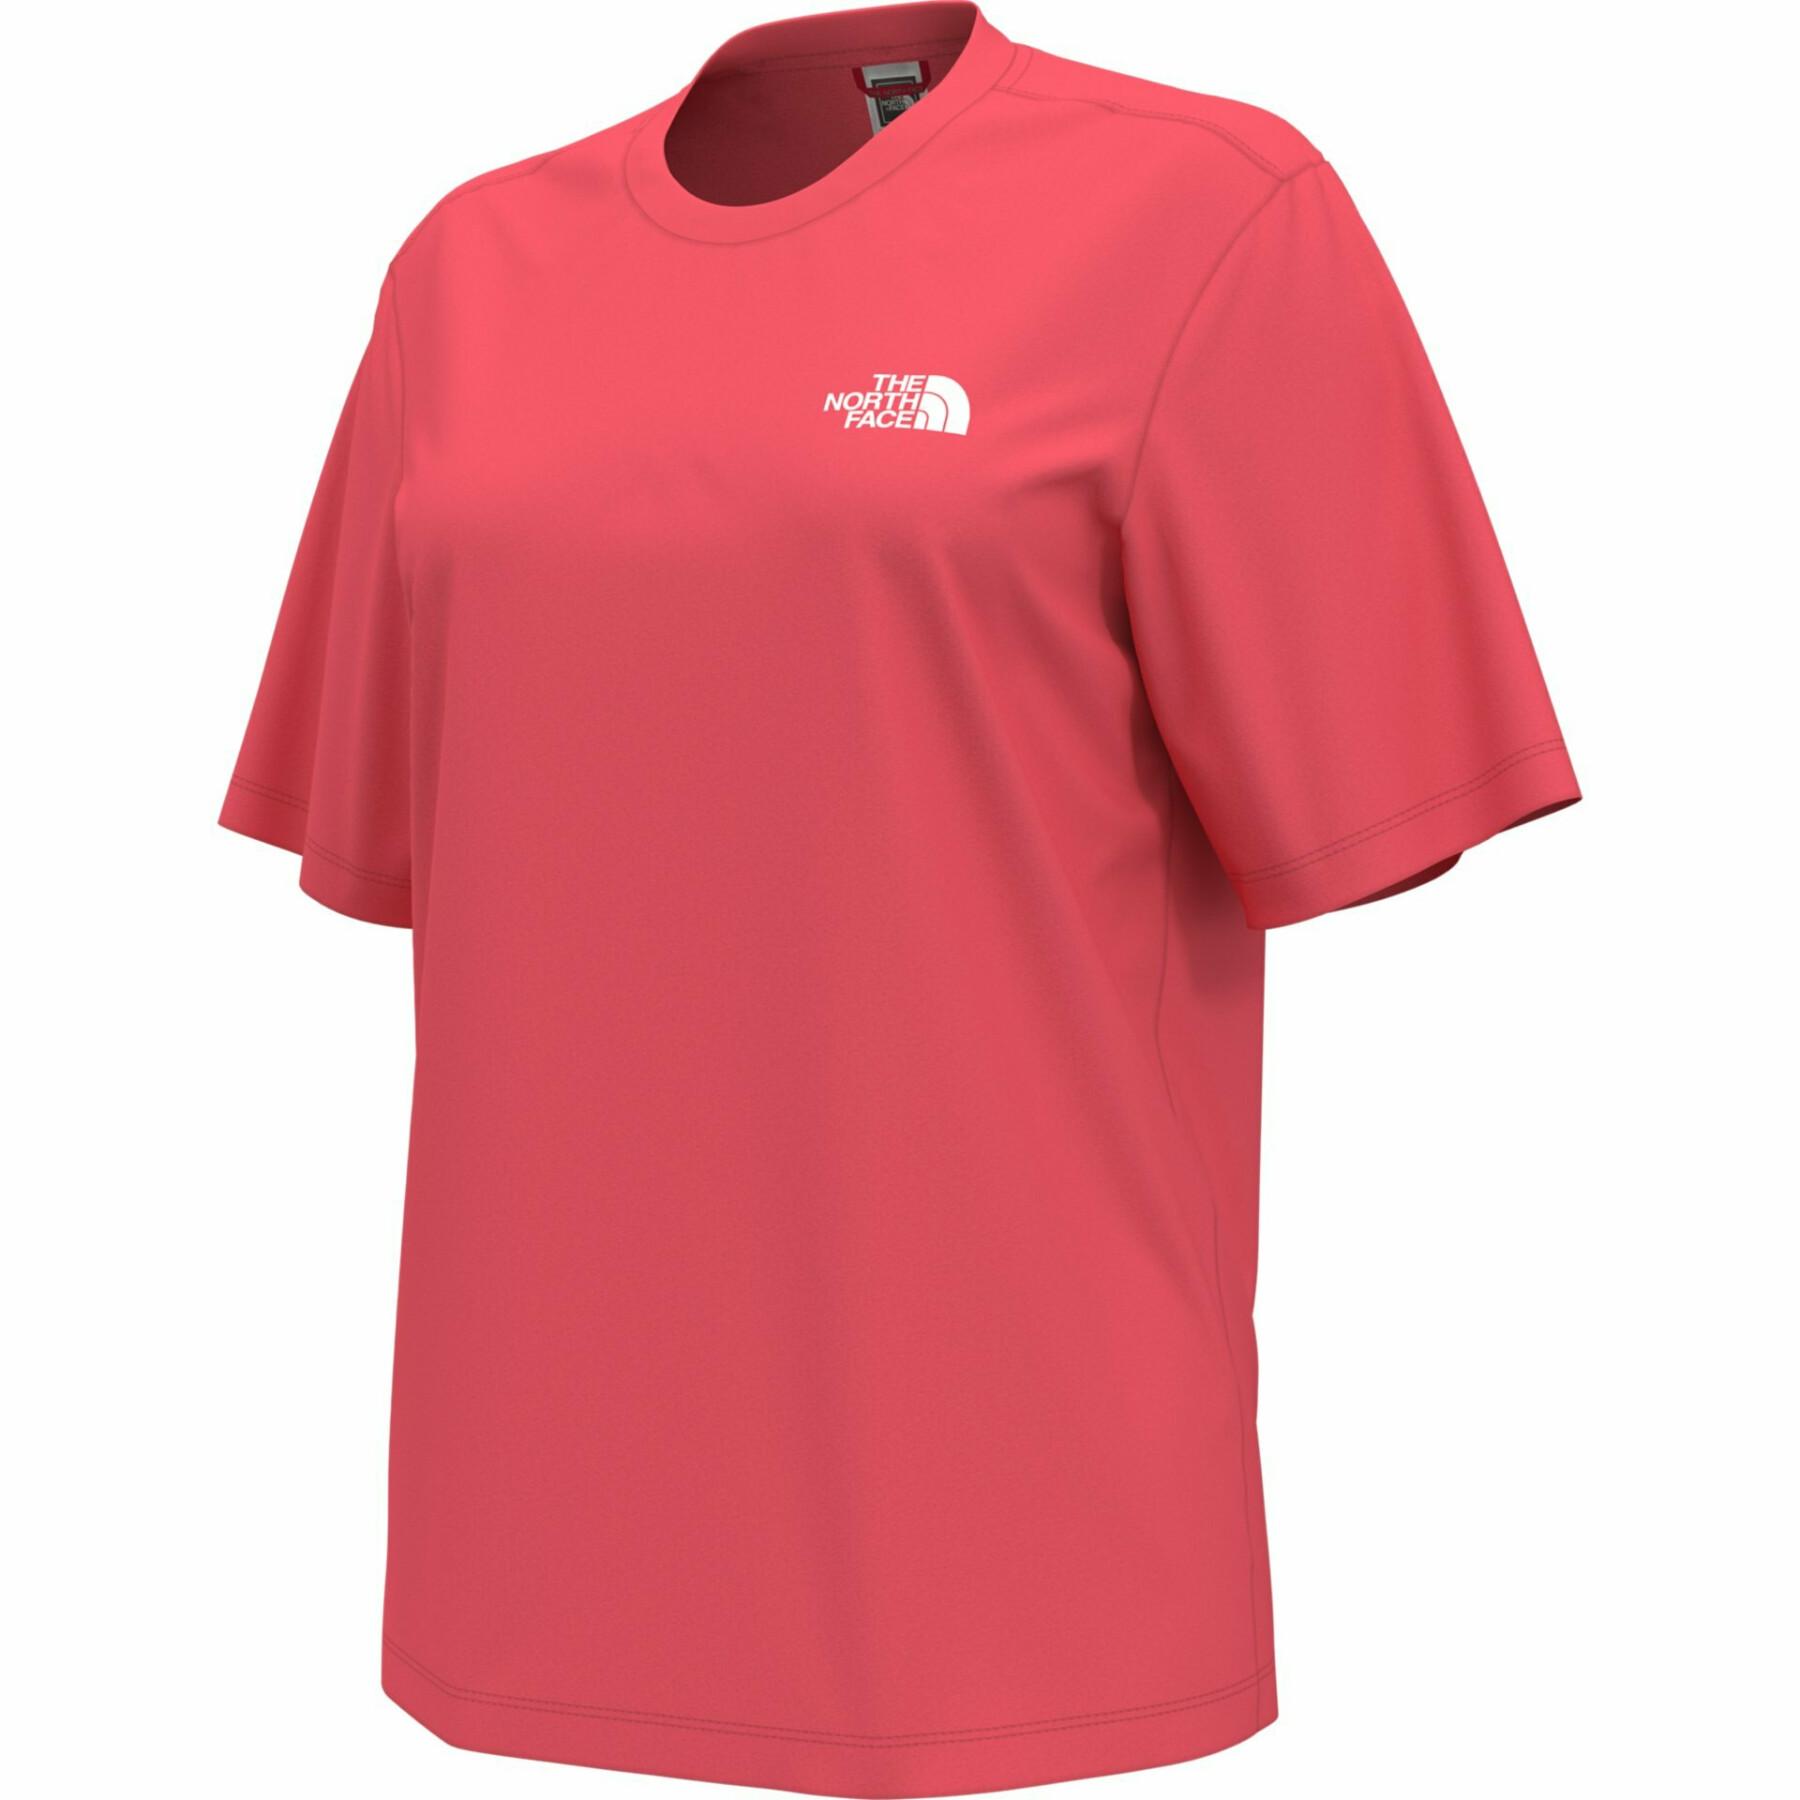 T-shirt donna The North Face Simple Dome